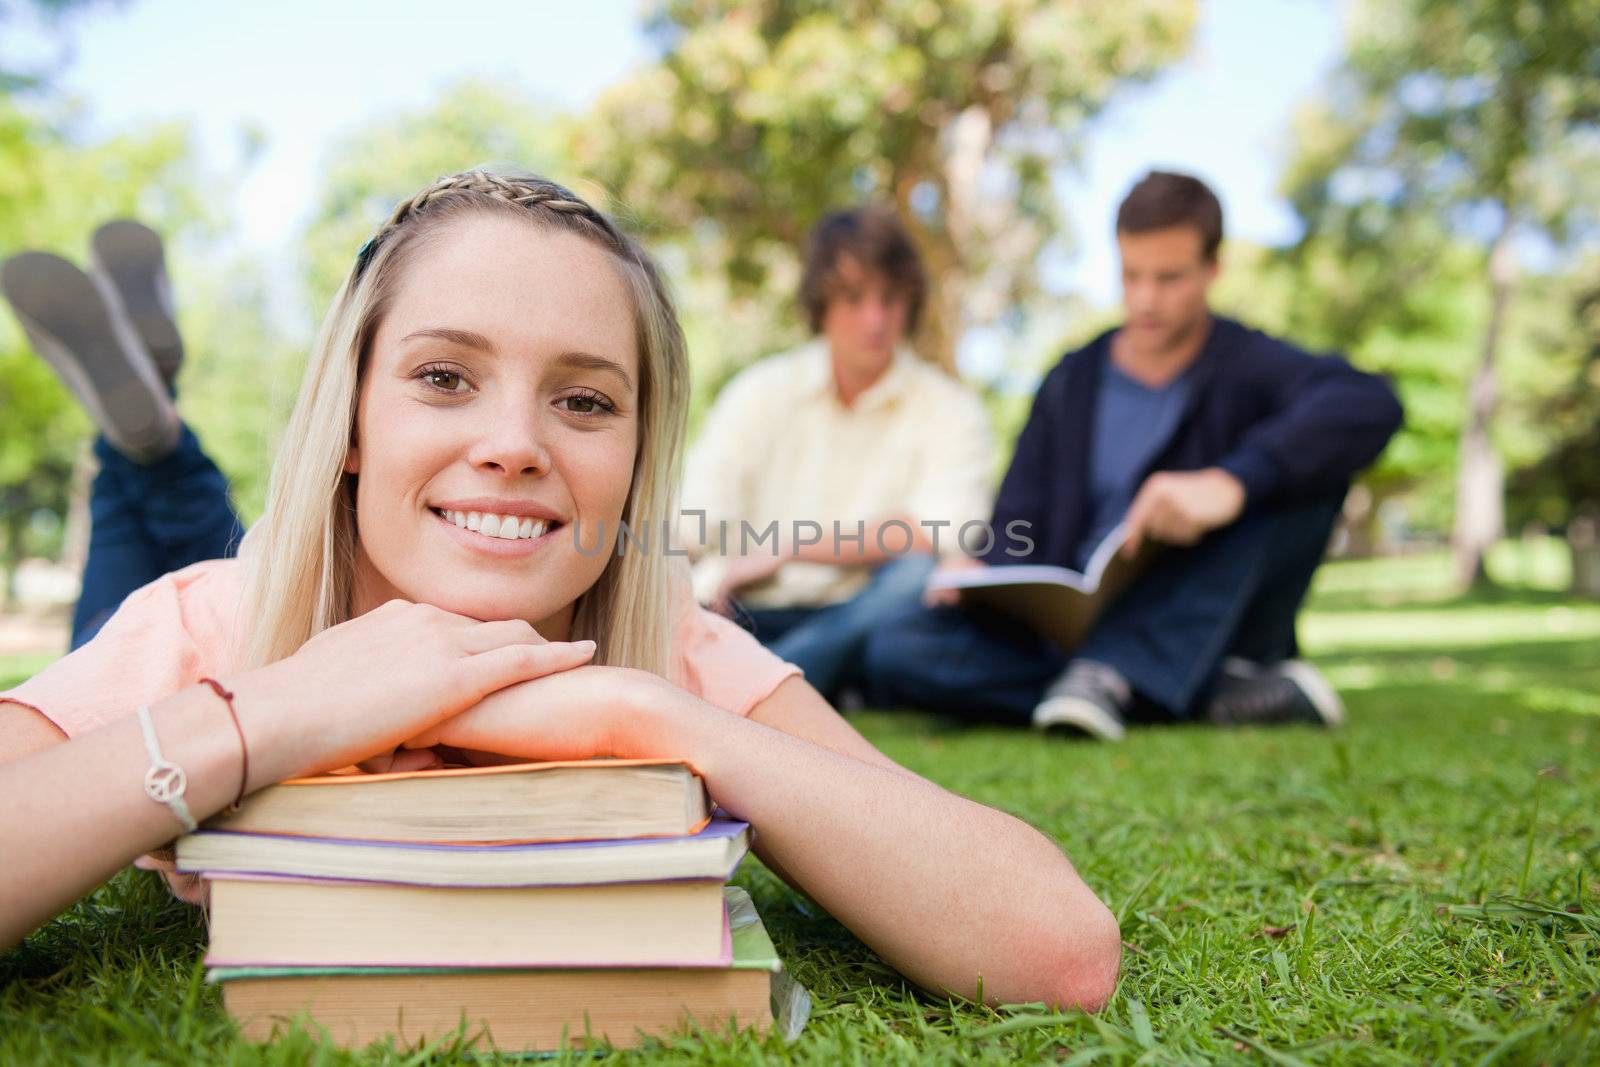 Porrtait of a girl lying head on her books in a park with friends in background